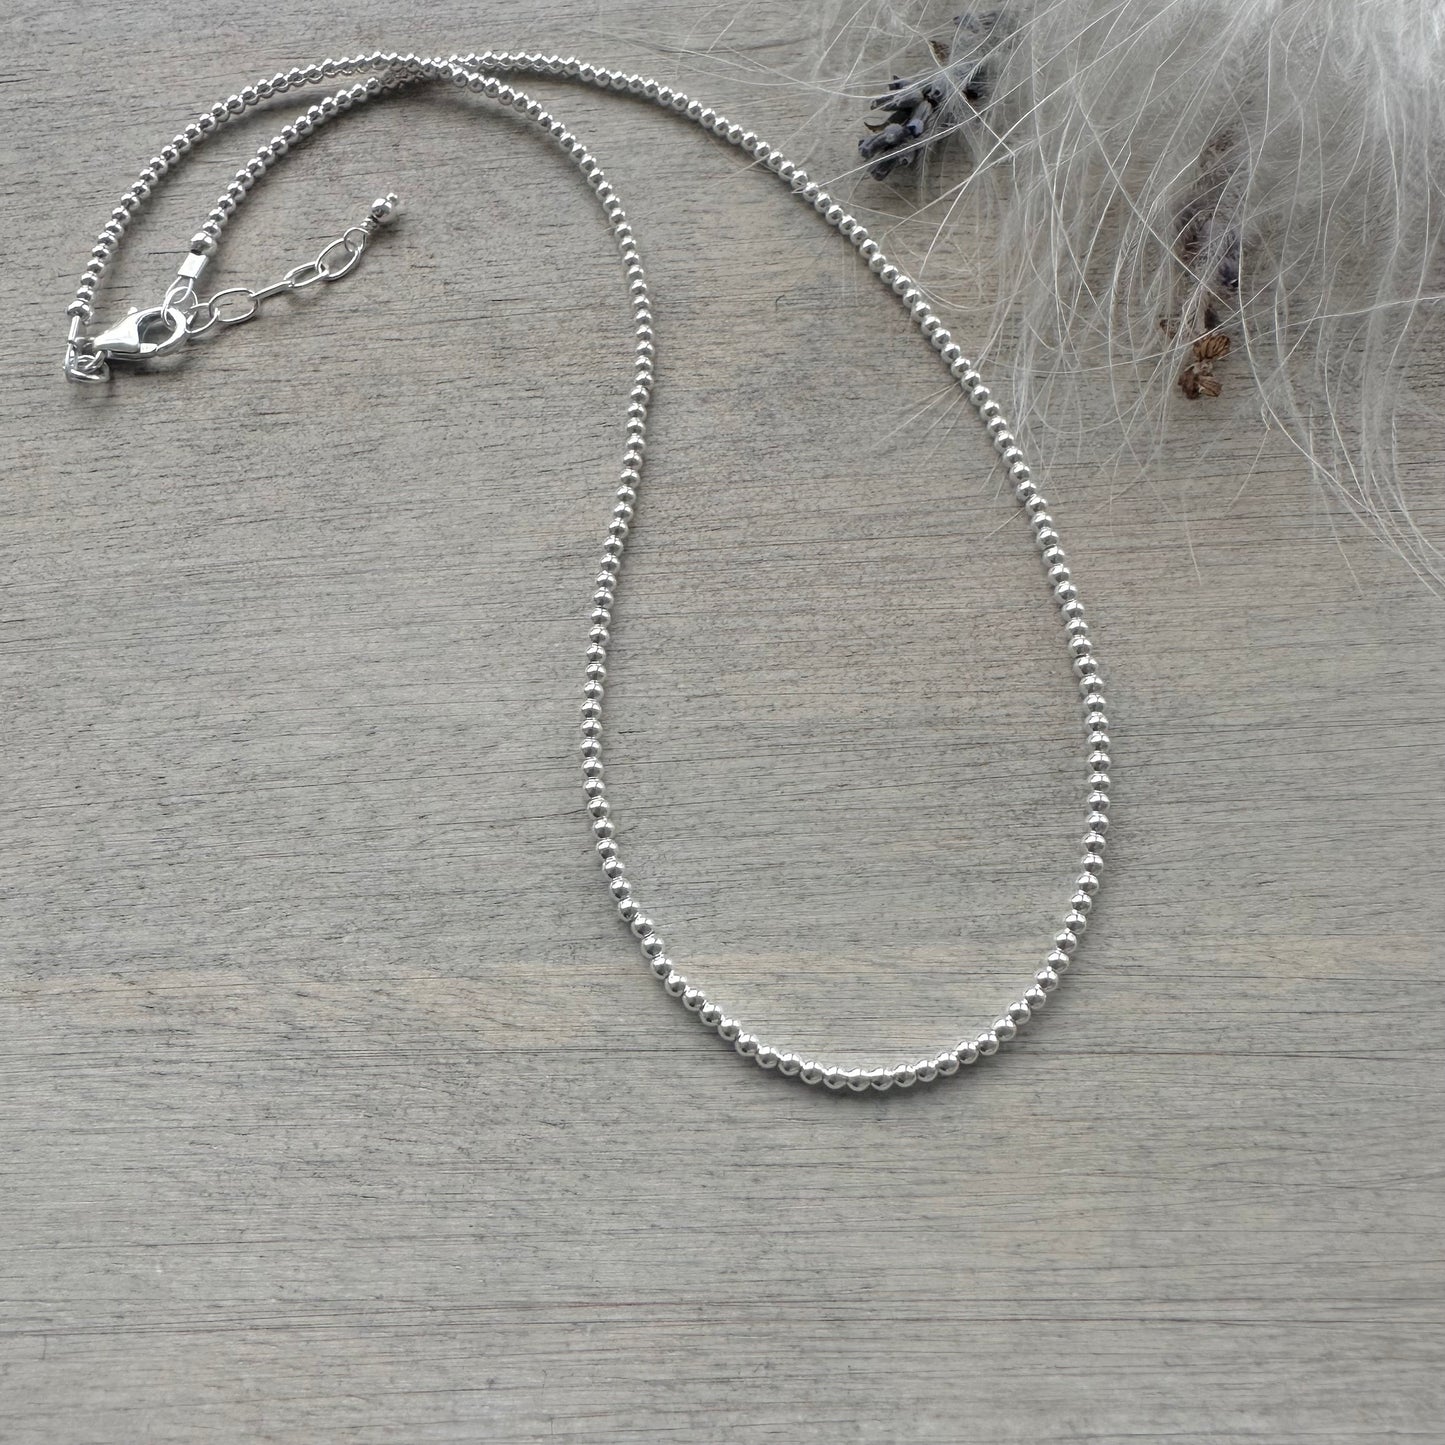 Thin 2mm Sterling Silver Bead Necklace , dainty necklace